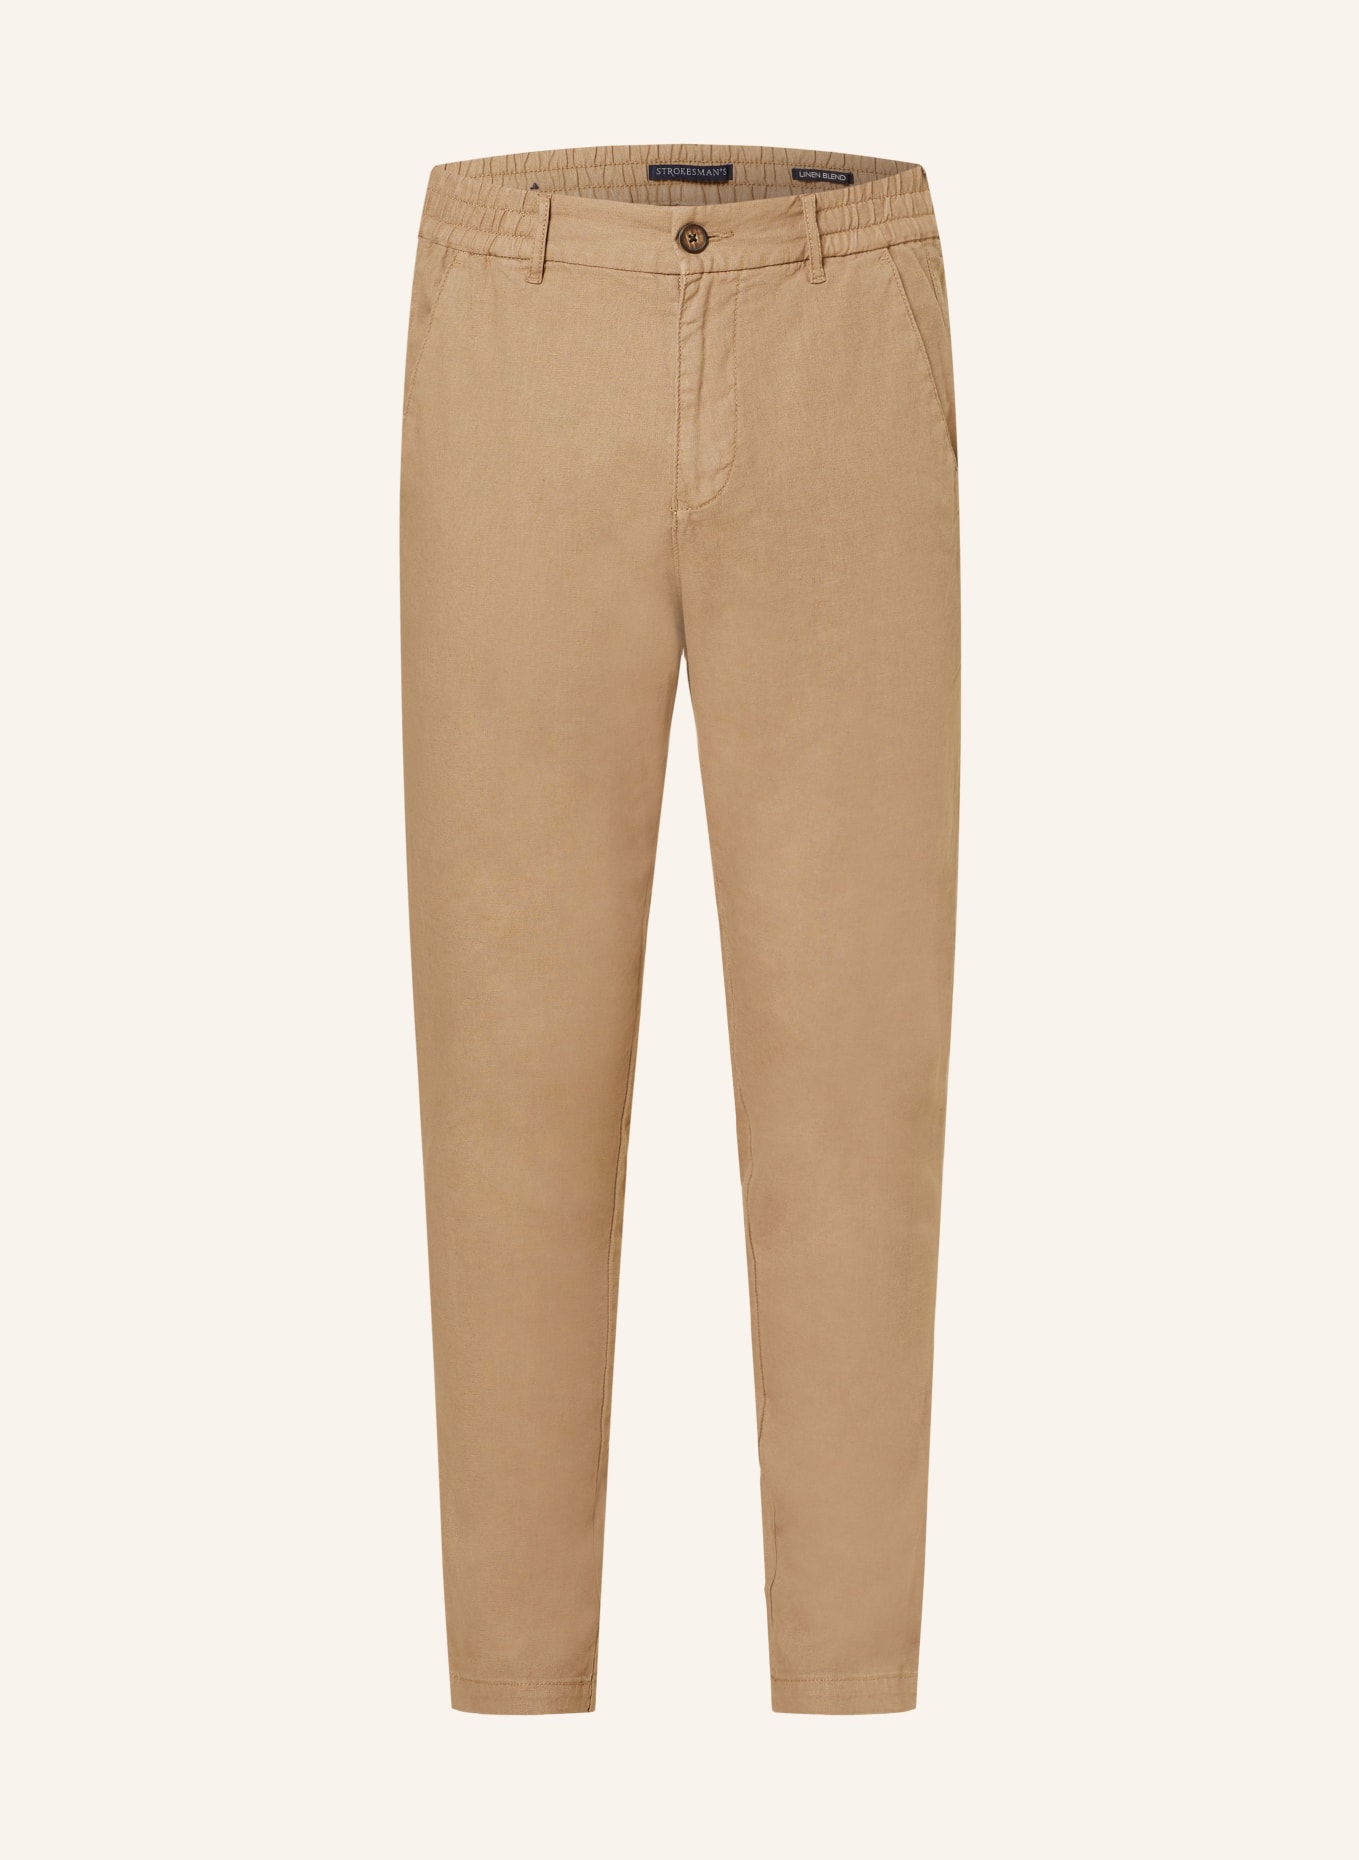 STROKESMAN'S Trousers comfort fit with linen, Color: BEIGE (Image 1)